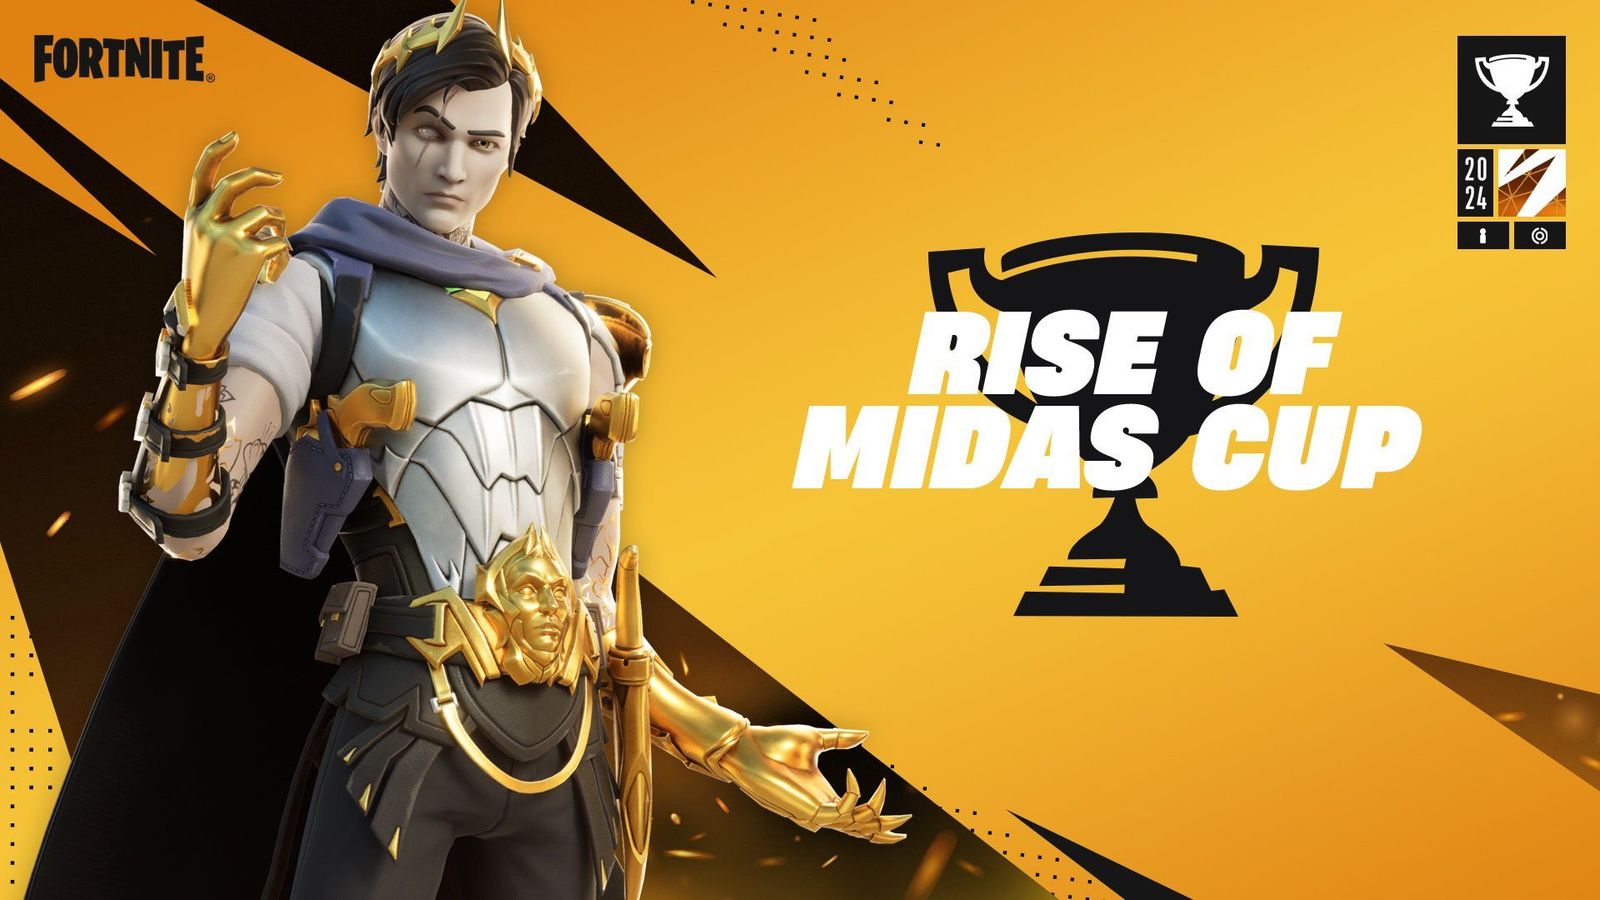 Announcement of the Midas Cup in Fortnite 